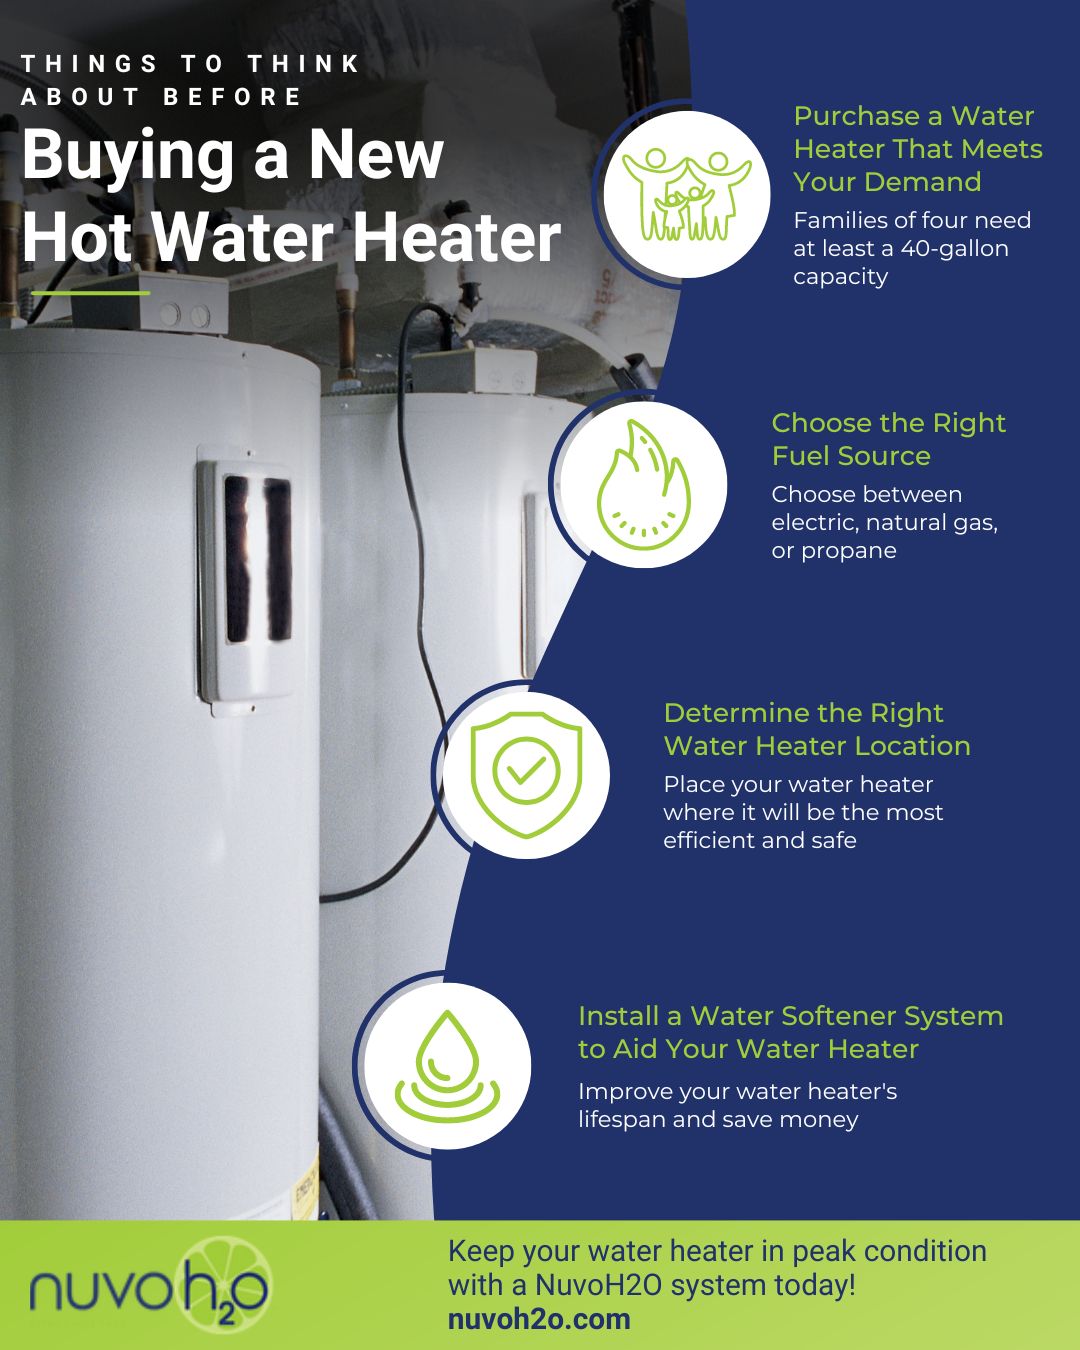 https://nuvoh2o.com/product_images/uploaded_images/m29816-nuvoh2o-things-to-think-about-before-buying-a-new-hot-water-heater-infographic.jpg